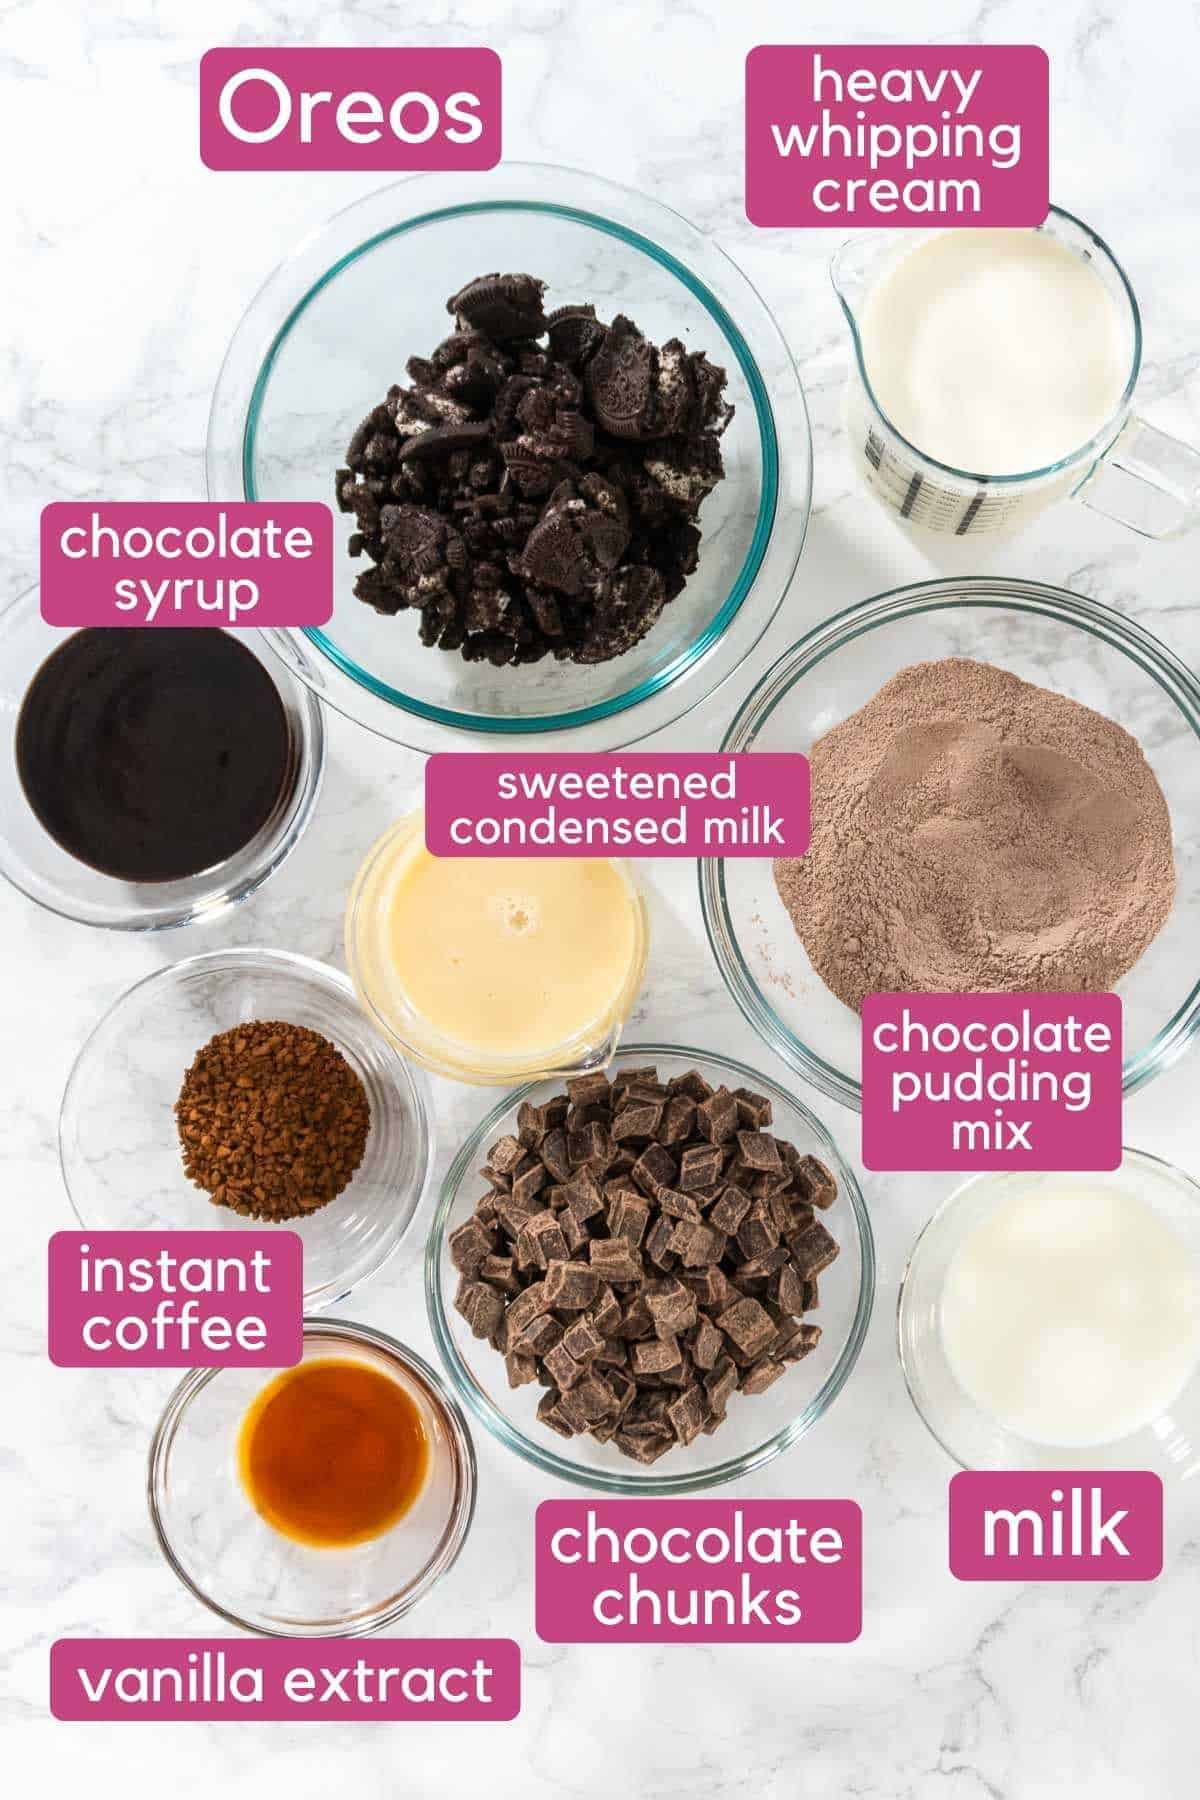 The ingredients needed to make Mississippi mud ice cream, including heavy cream and chocolate chips.